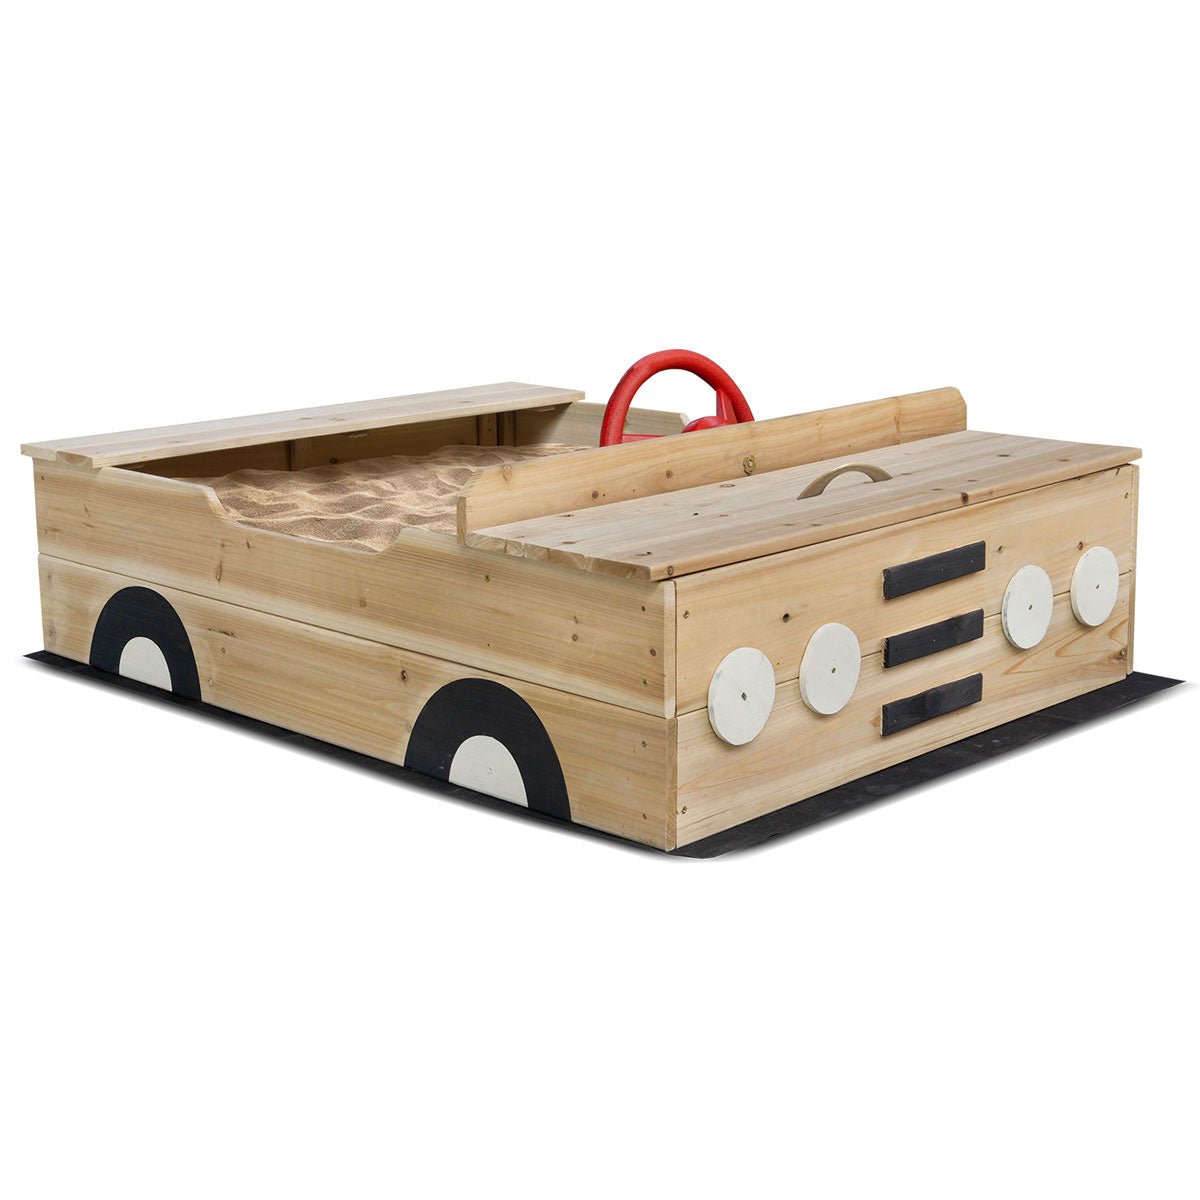 Shop Lifespan Kids Outback Interactive Sandpit | Active Fun for Kids